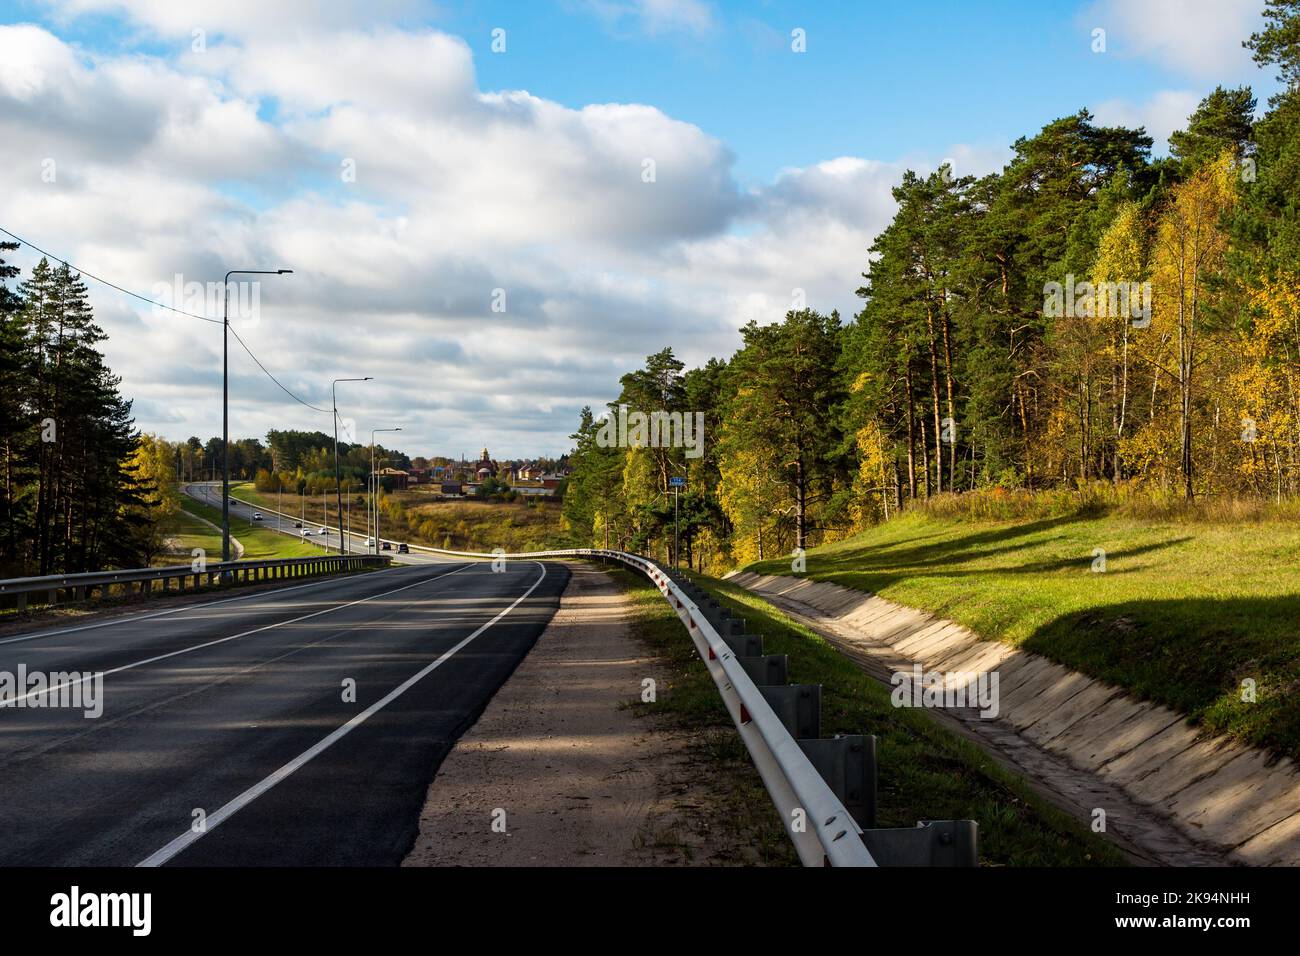 A beautiful view of the turn of the highway in a picturesque area. Varshavskoye highway A130 towards the city of Maloyaroslavets, Kaluga region, Russi Stock Photo